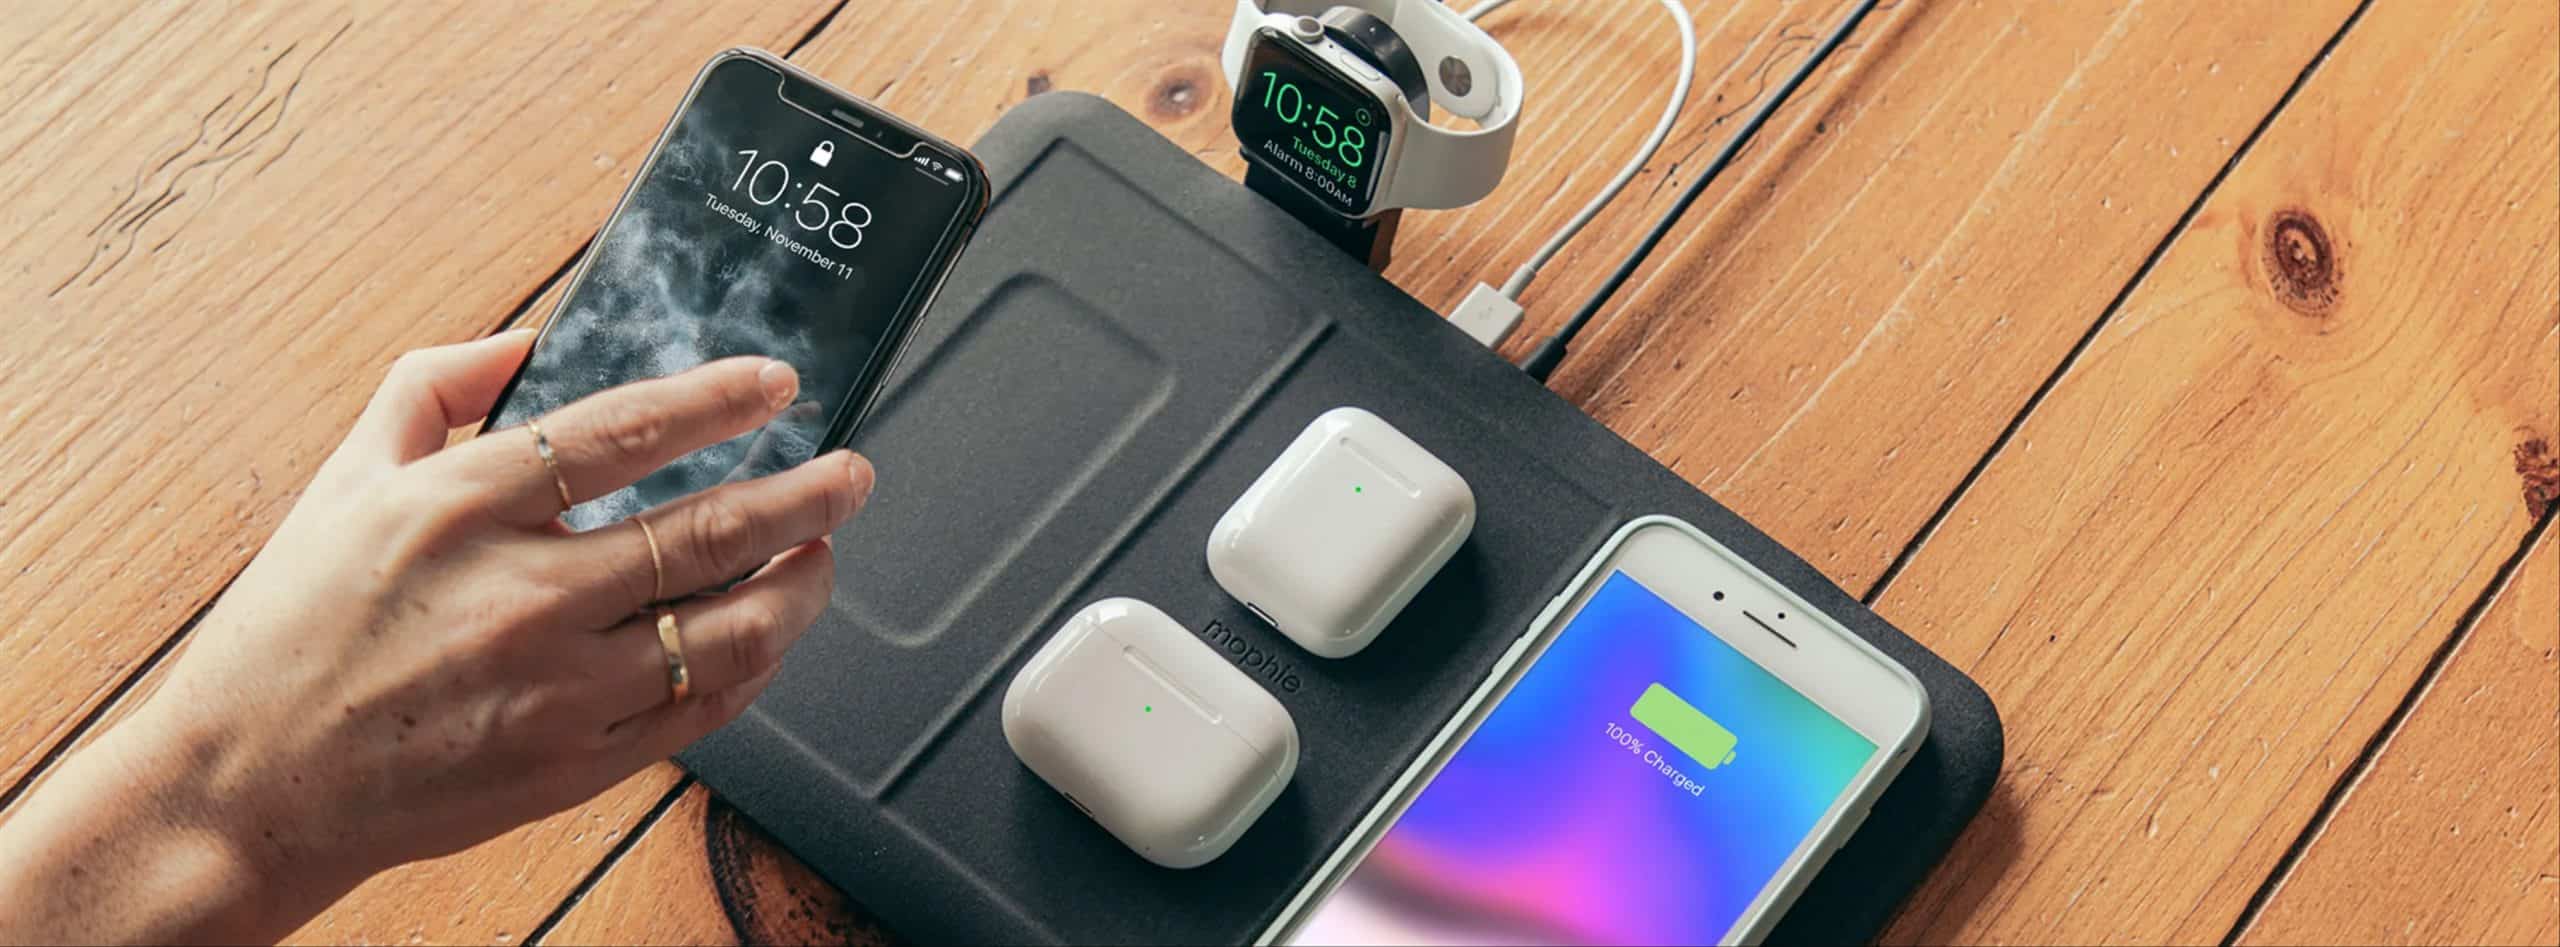 Wireless charge four devices simultaneously with this 4-in-1 wireless charging mat